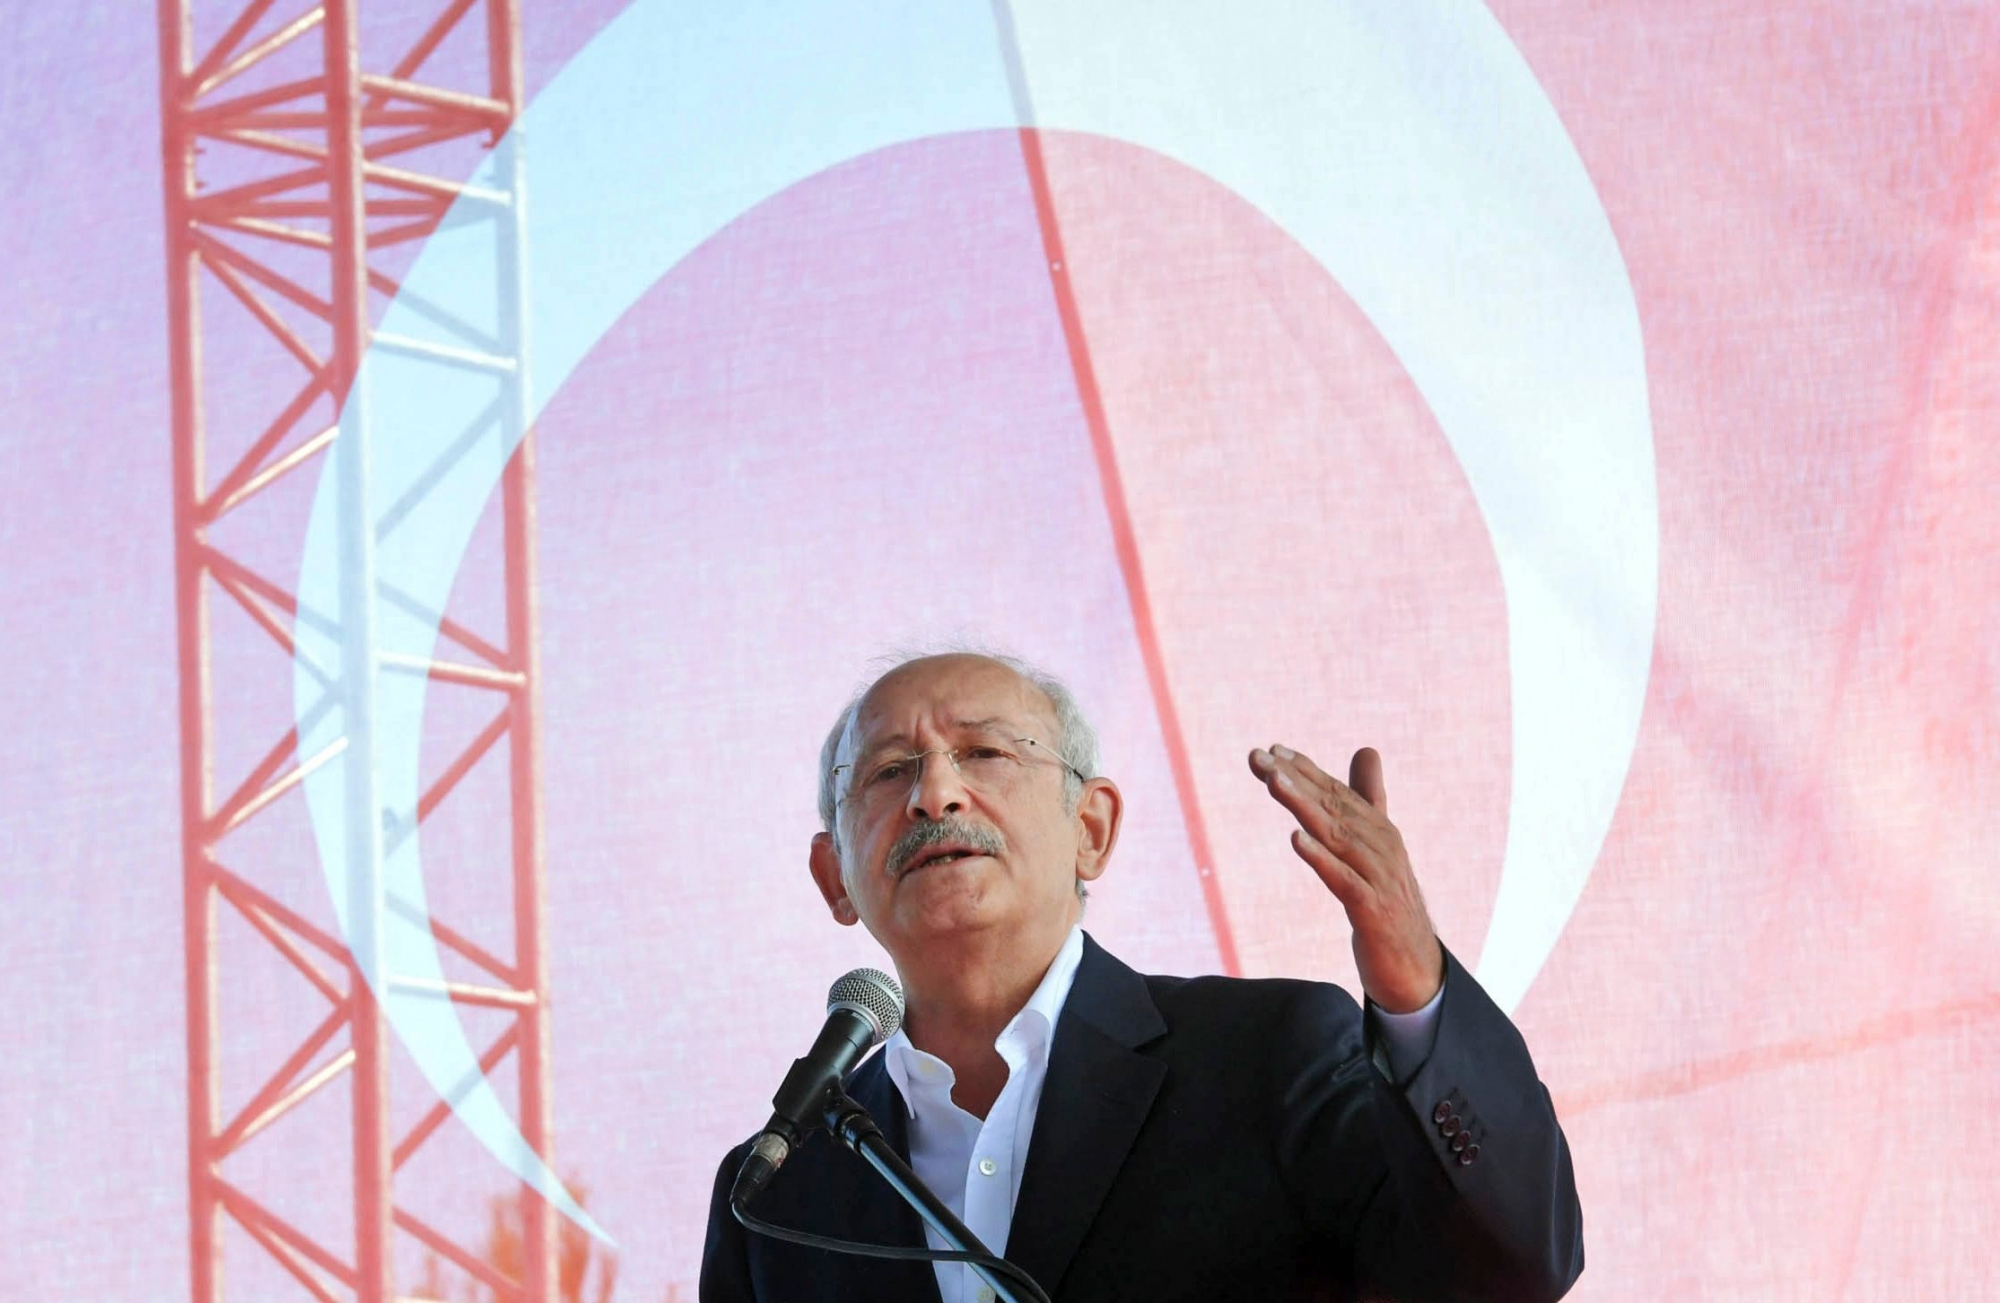 Kemal Kilicdaroglu, leader of Turkey's main opposition Republican's People Party, or CHP, talks during an event his party is calling "Justice Council" in Canakkale, Turkey, Saturday, Aug. 26, 2017. The party says they are aiming to build a new approach for their party through this 4-day open event, to be attended by the leader, CHP lawmakers, several NGOs and supporters. (AP Photo) Turkey Politics Opposition